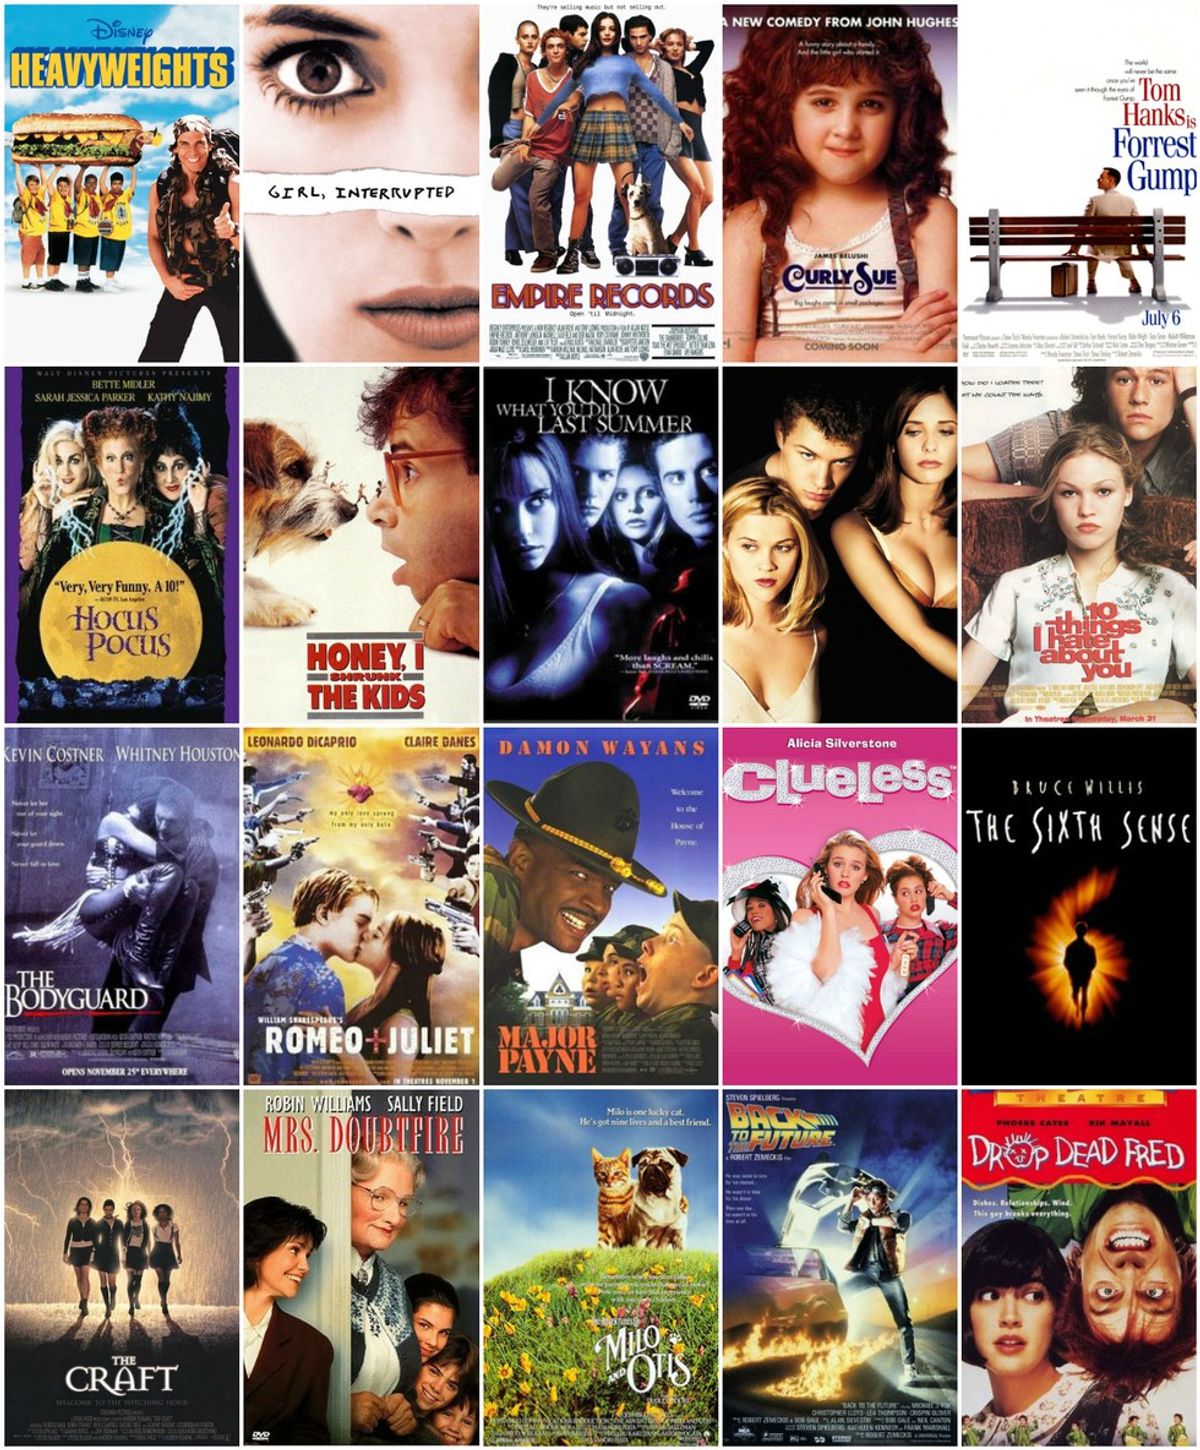 8 Underrated Movies Of The 80's & 90's